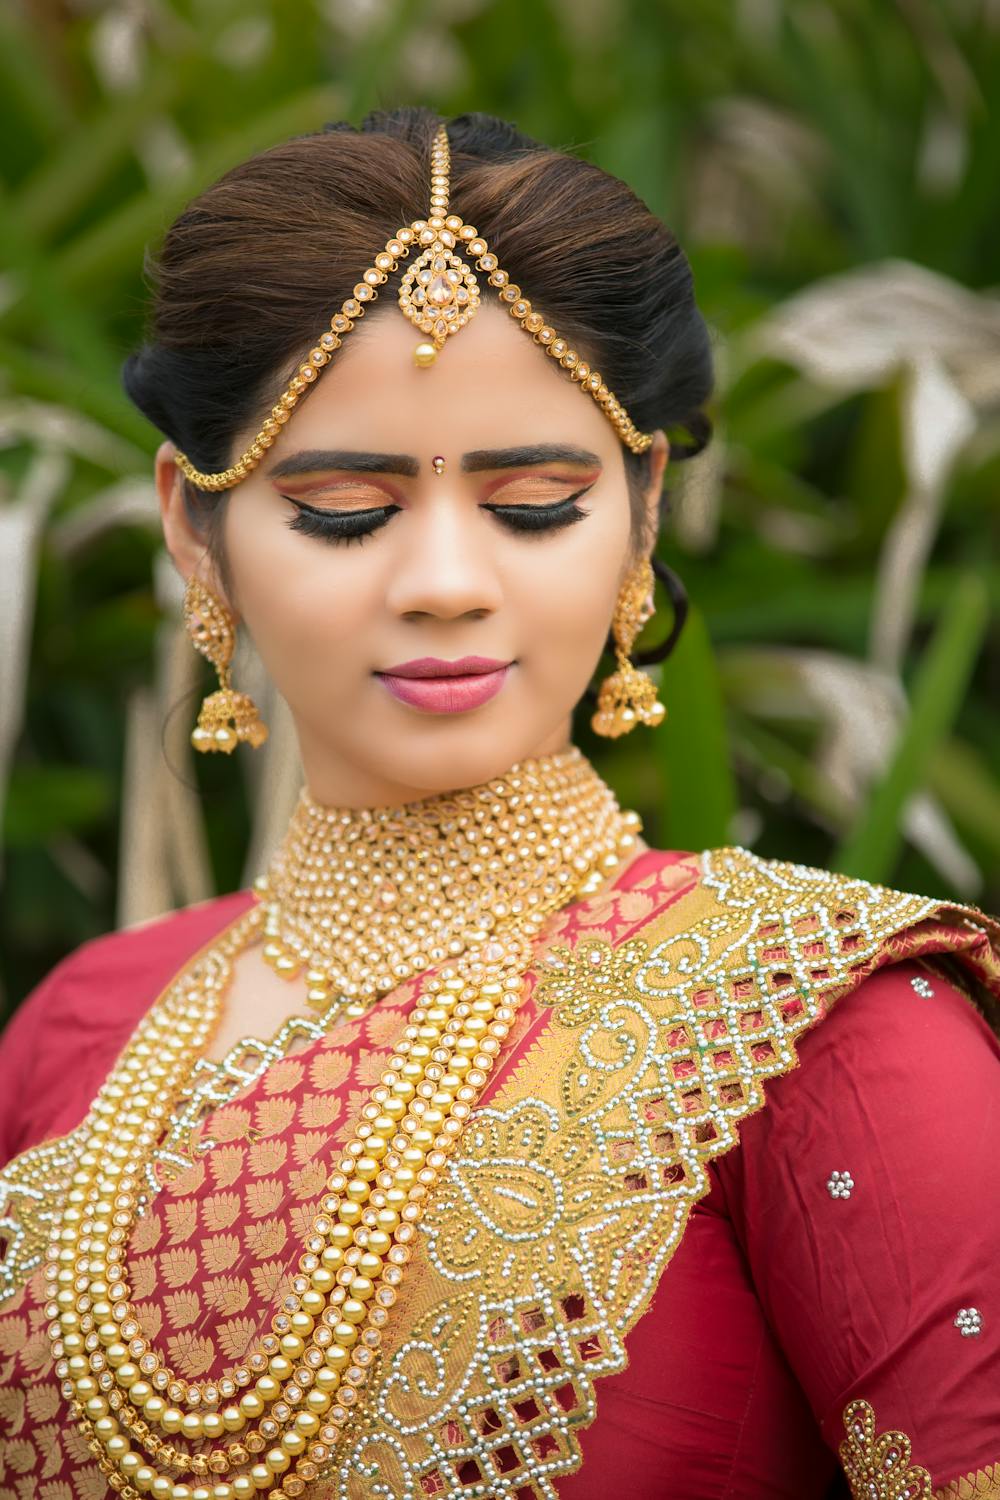 Indian Prince Photo by Bhoopal M from Pexels